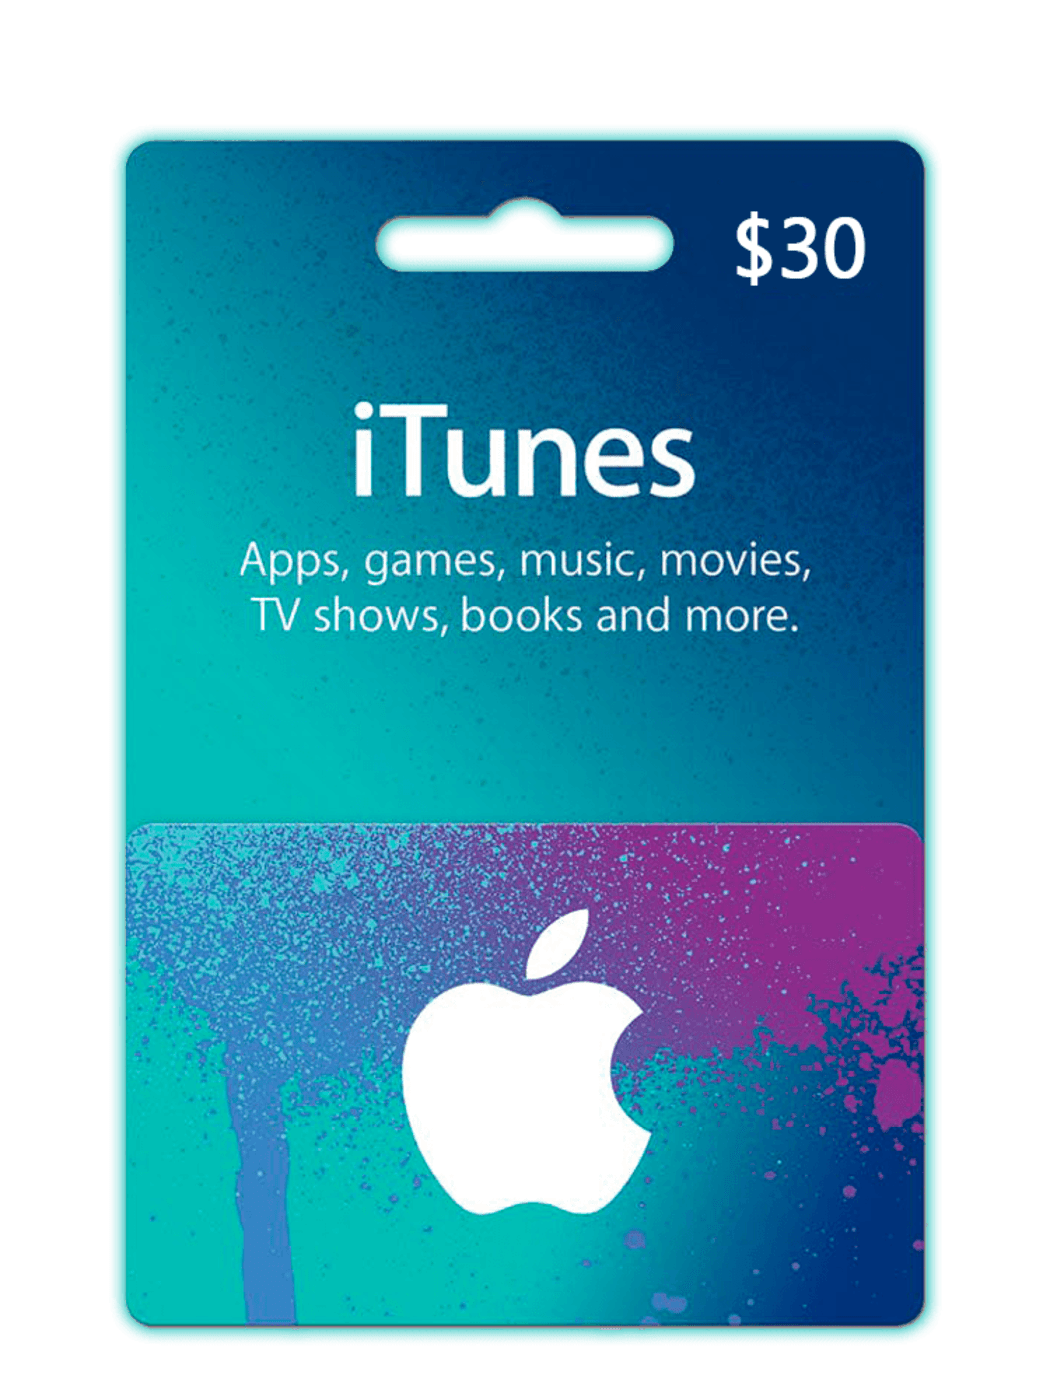 30 dollar Apple iTunes gift card code, Great offer!